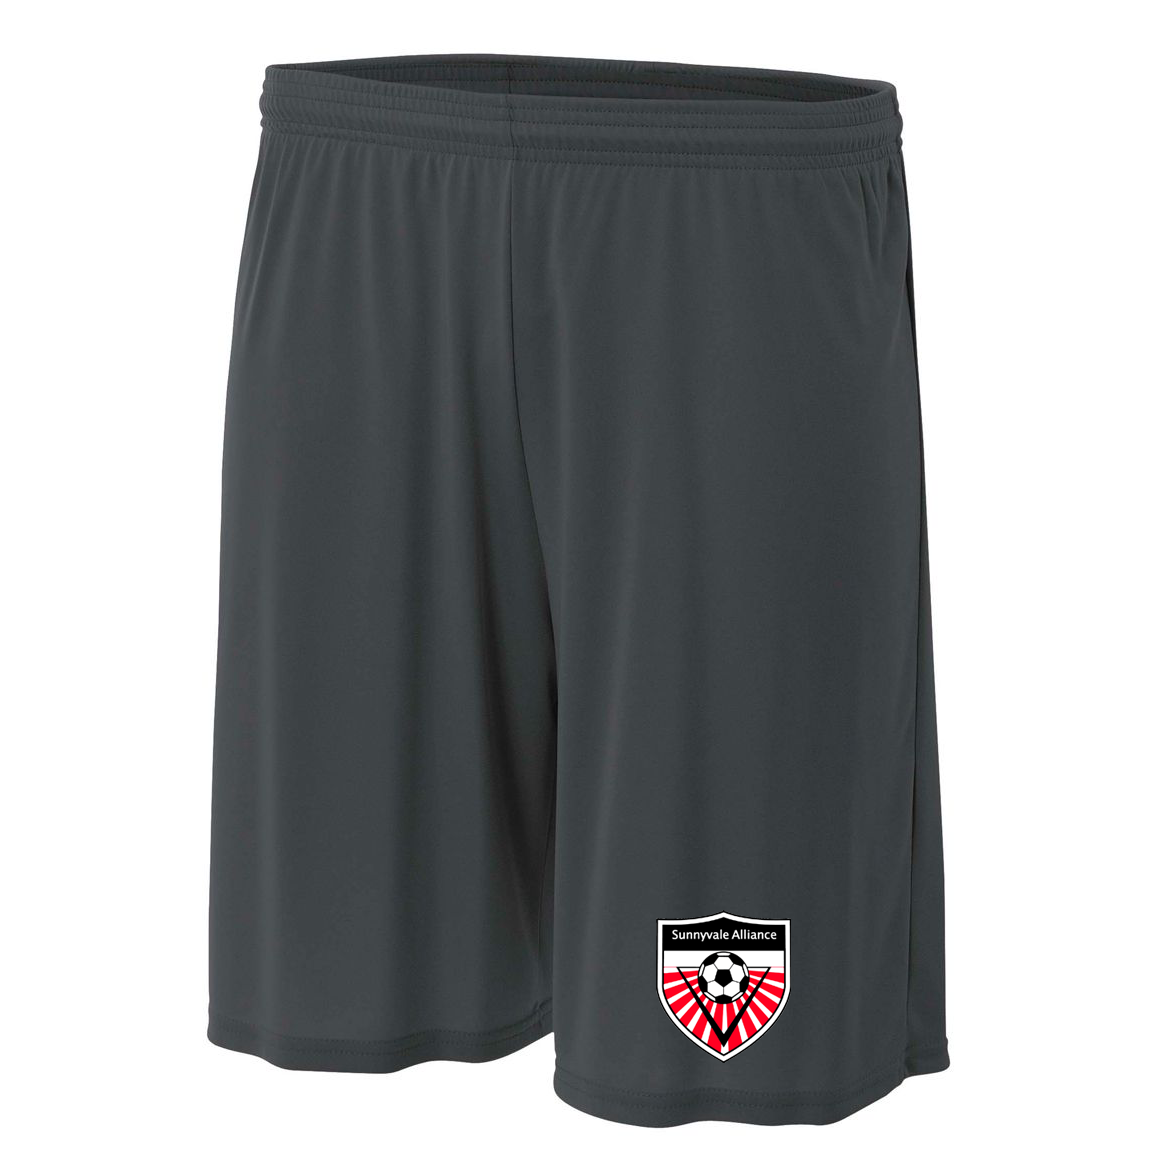 Sunnyvale Alliance Cooling 7" Performance Shorts